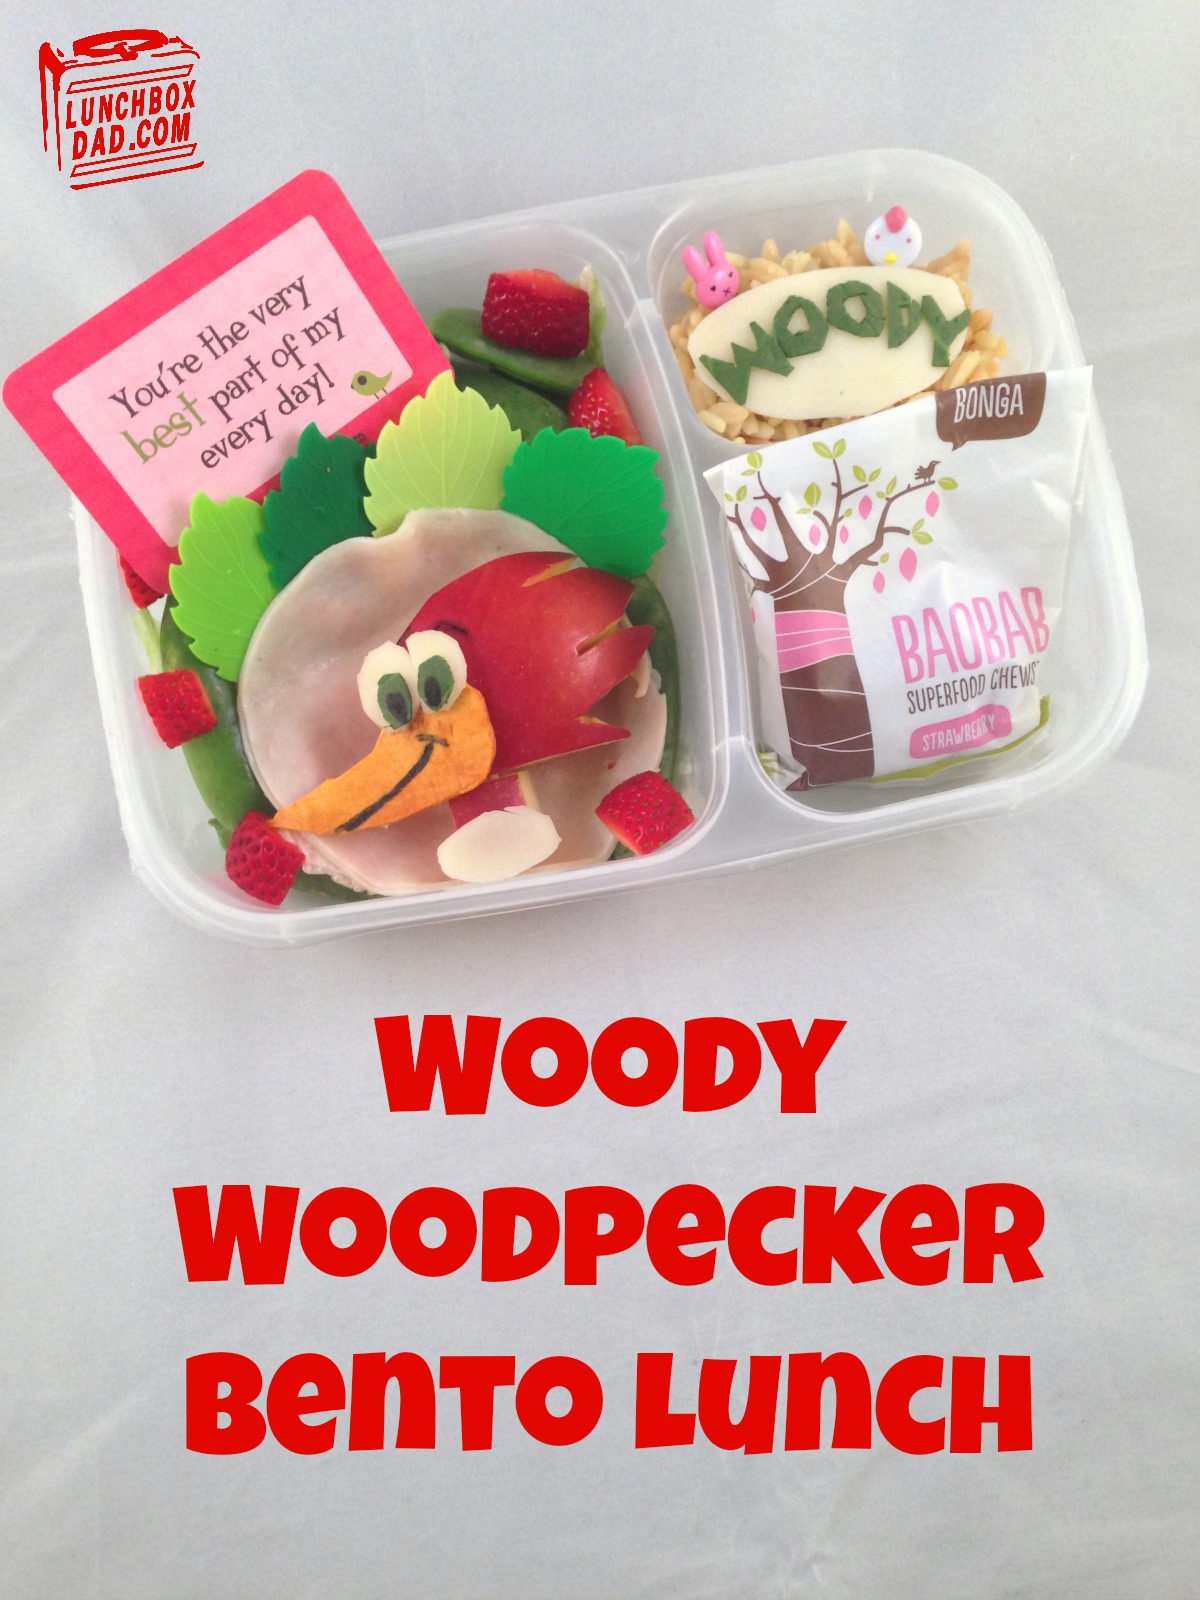 Woody Woodpecker Bento Lunch for kids